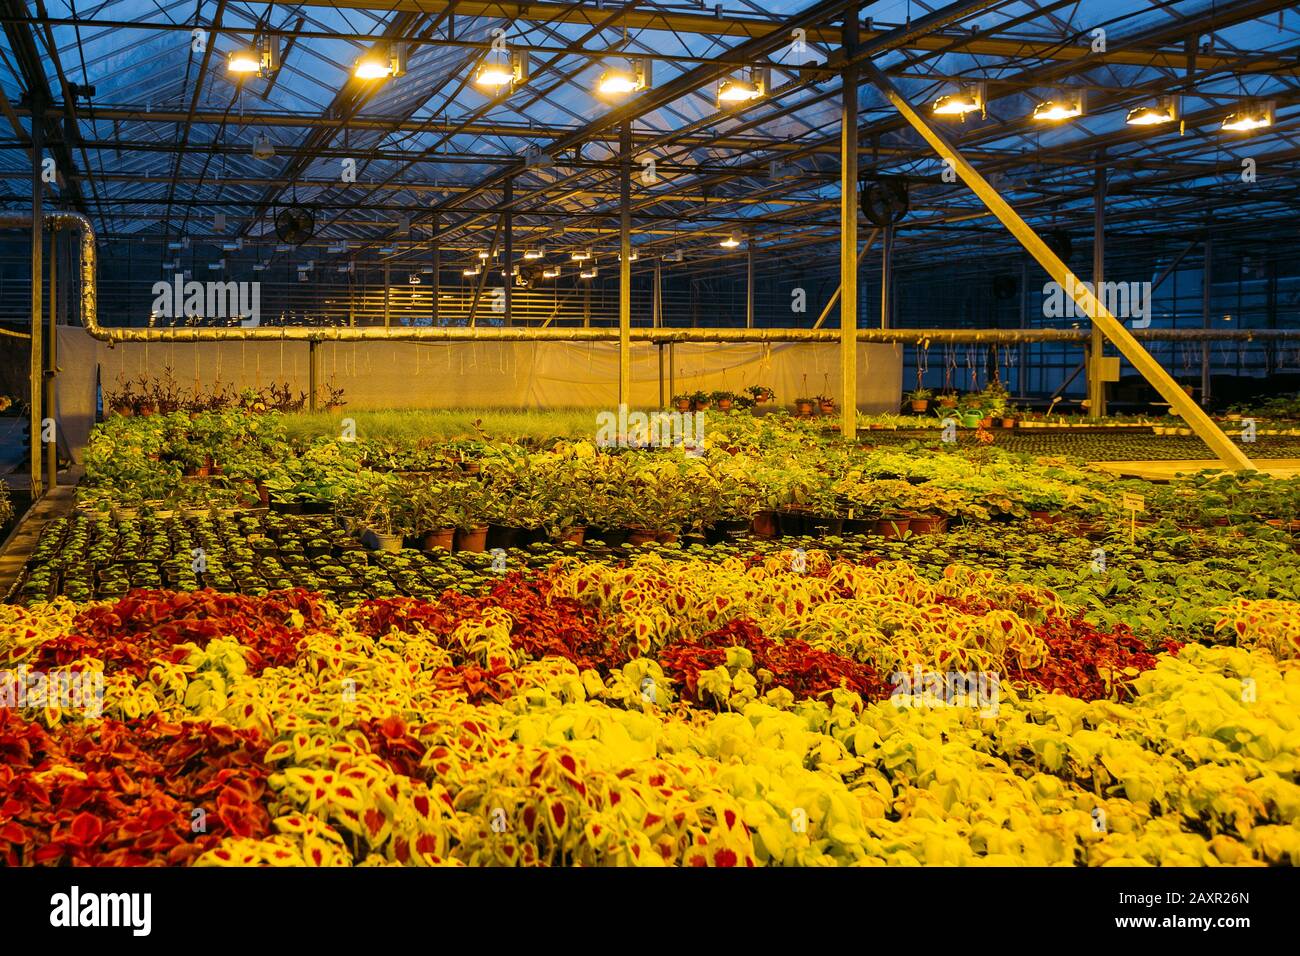 Colorful coleus plants growing in modern greenhouse in the evening at artificial light conditions Stock Photo